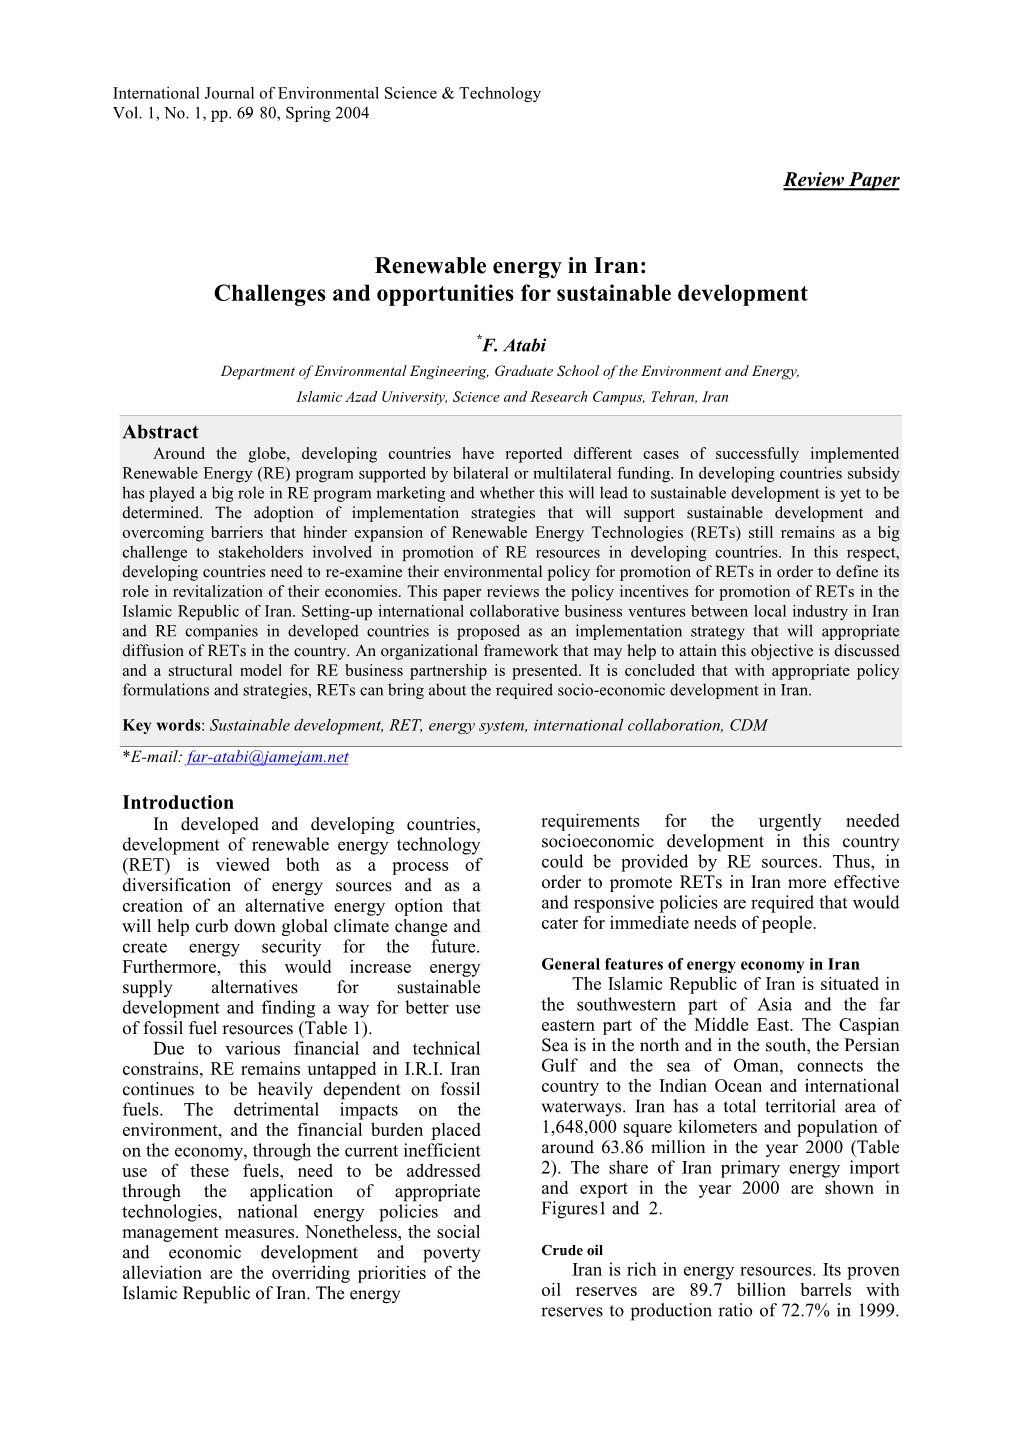 Renewable Energy in Iran: Challenges and Opportunities for Sustainable Development